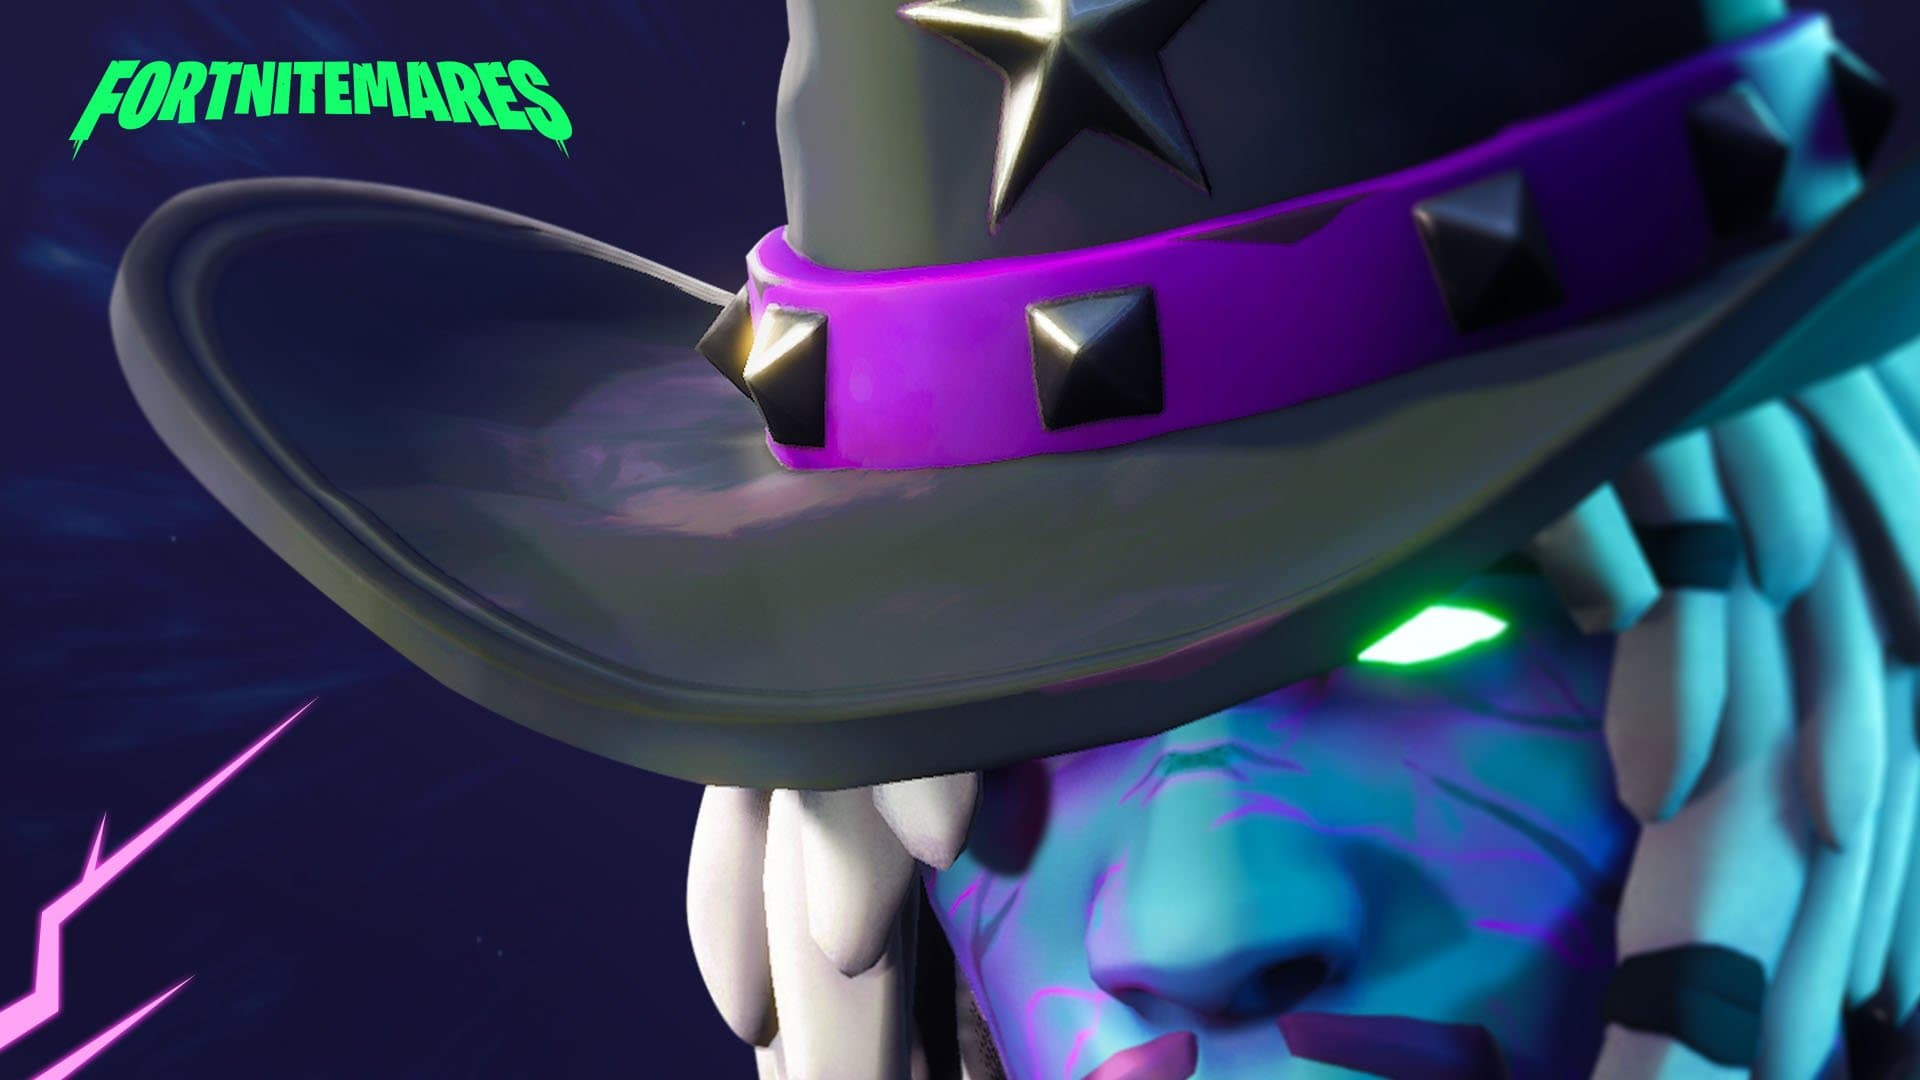 Epic Games teases 'Fortnitemares' event for Halloween